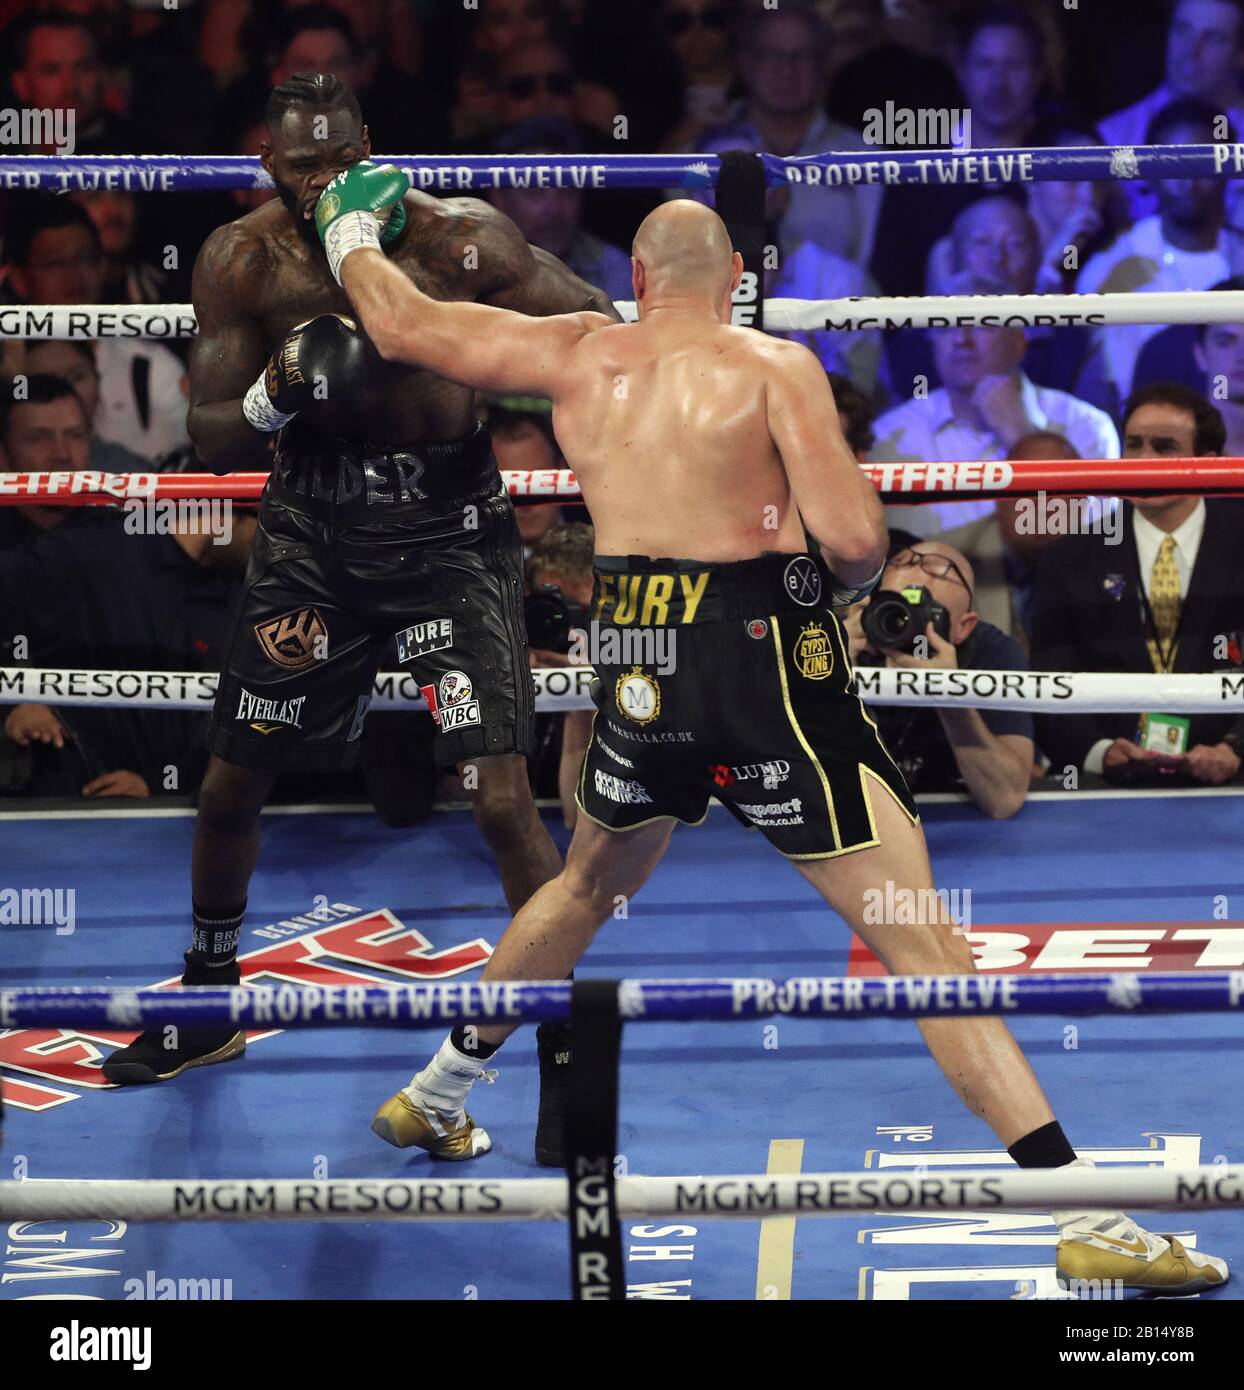 Tyson Fury (right) and Deontay Wilder during the World Boxing Council World Heavy Title bout at the MGM Grand, Las Vegas. Stock Photo